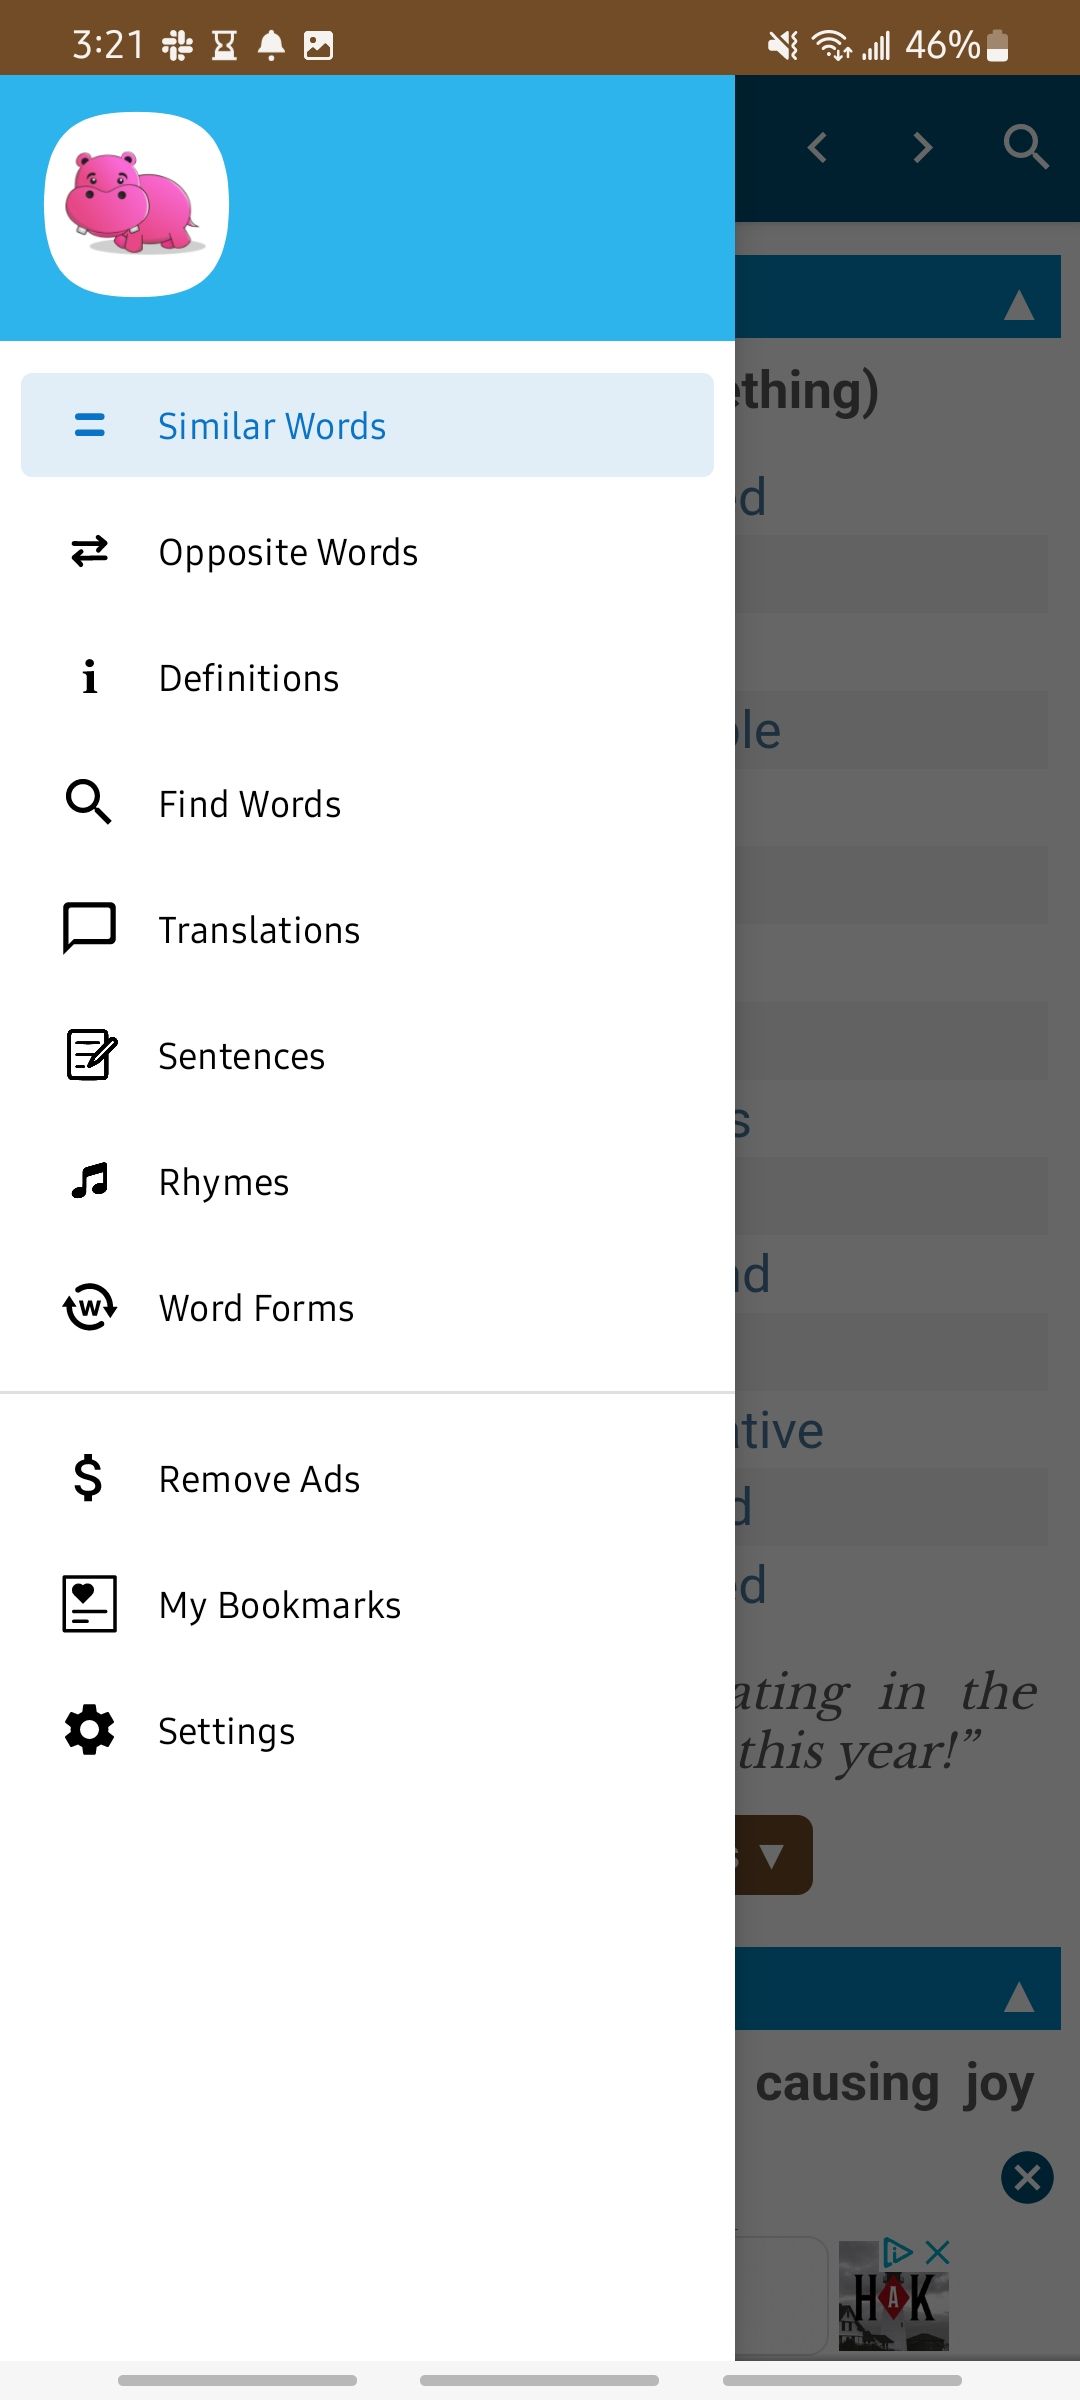 Screenshot of the side menu in the Word Hippo app